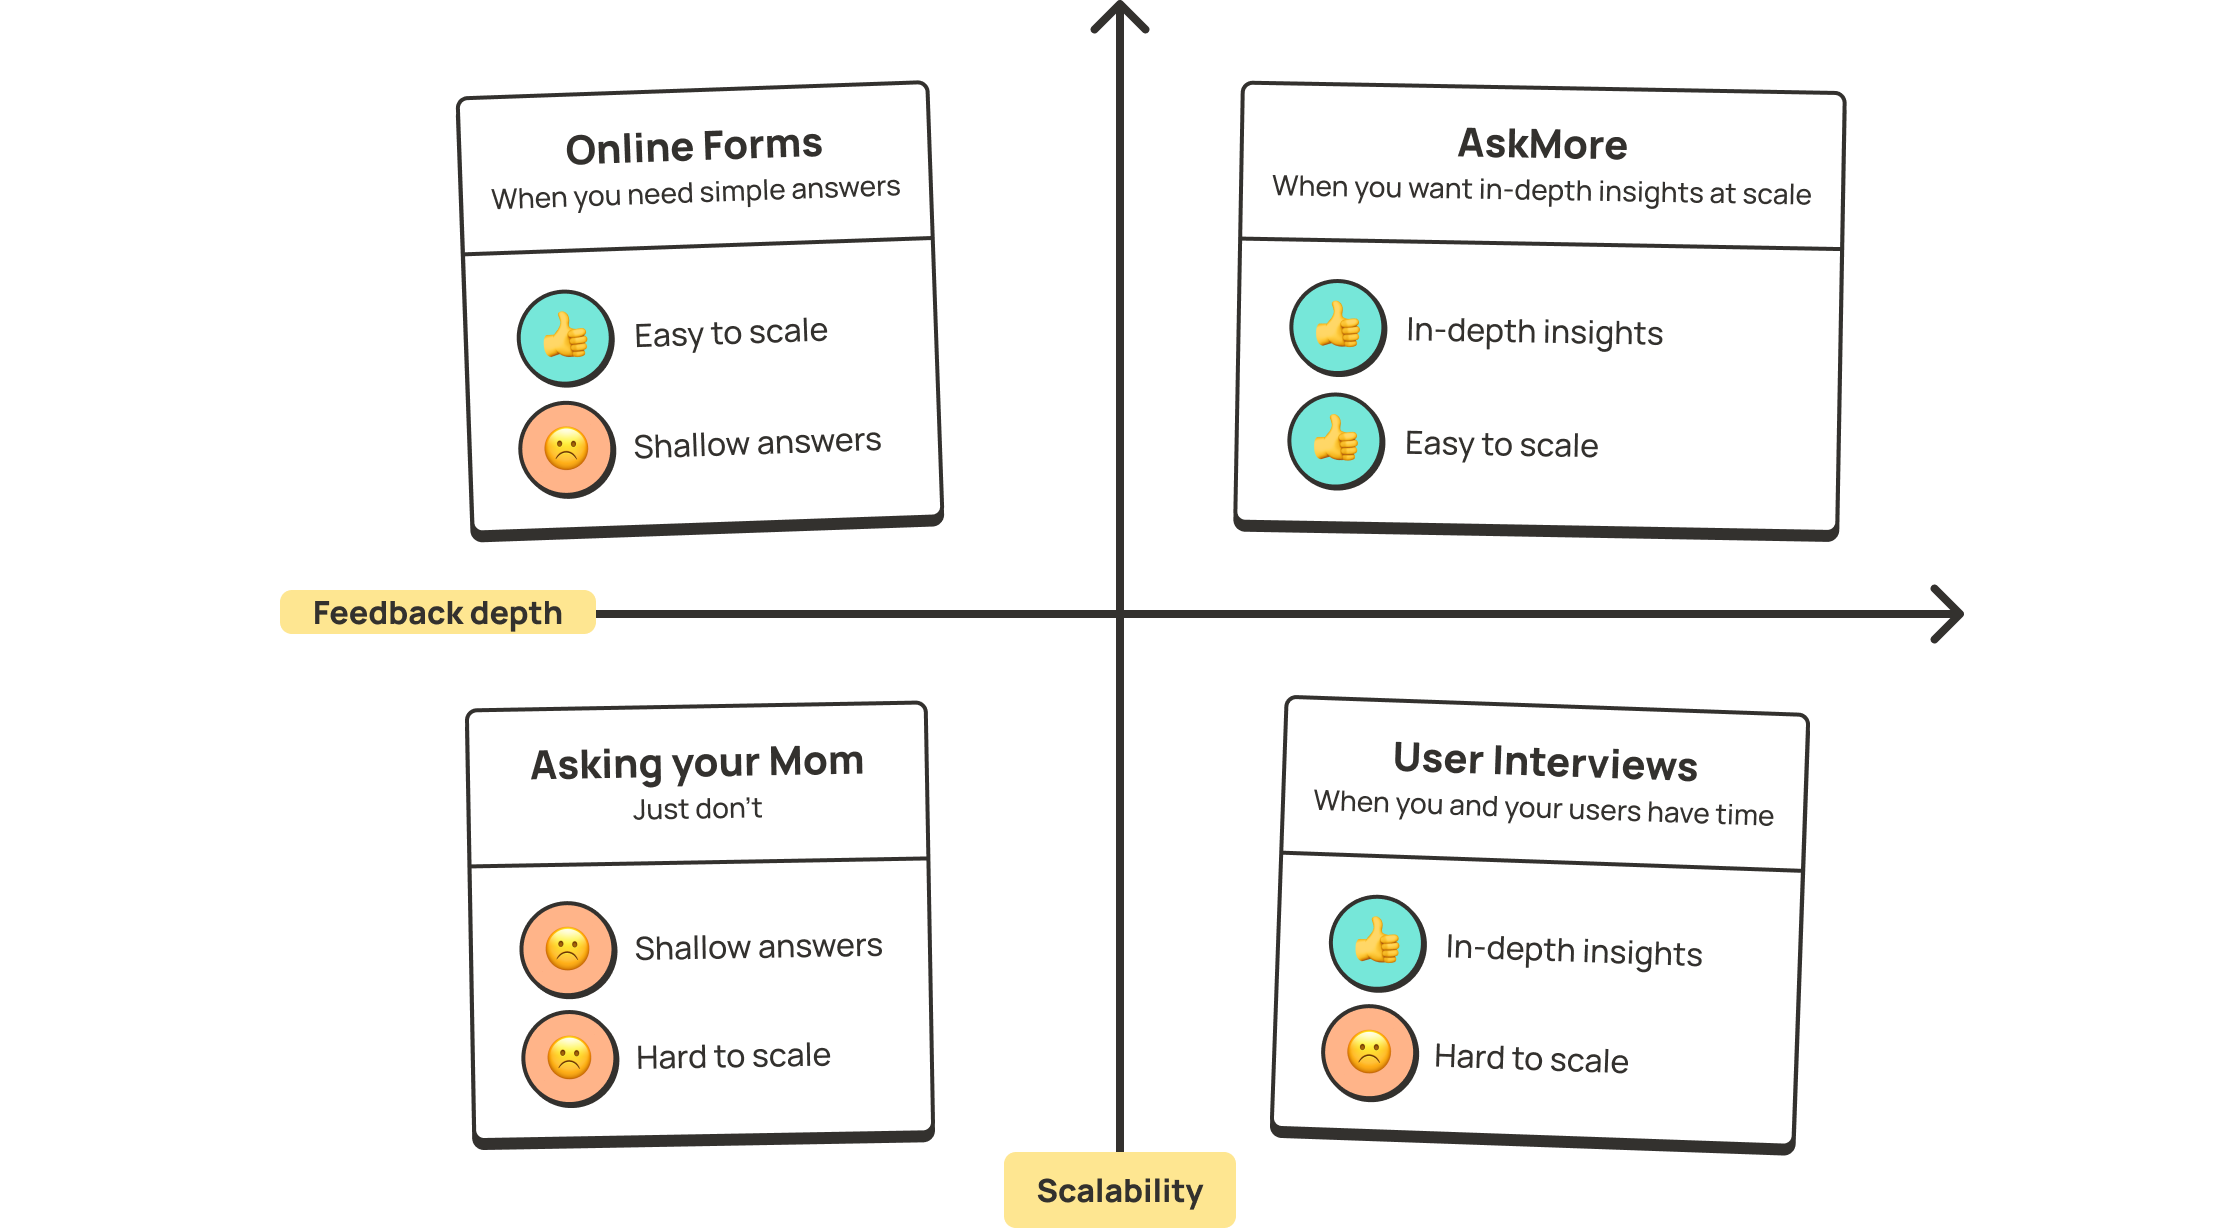 Use AskMore when you want in-depth insights at scale